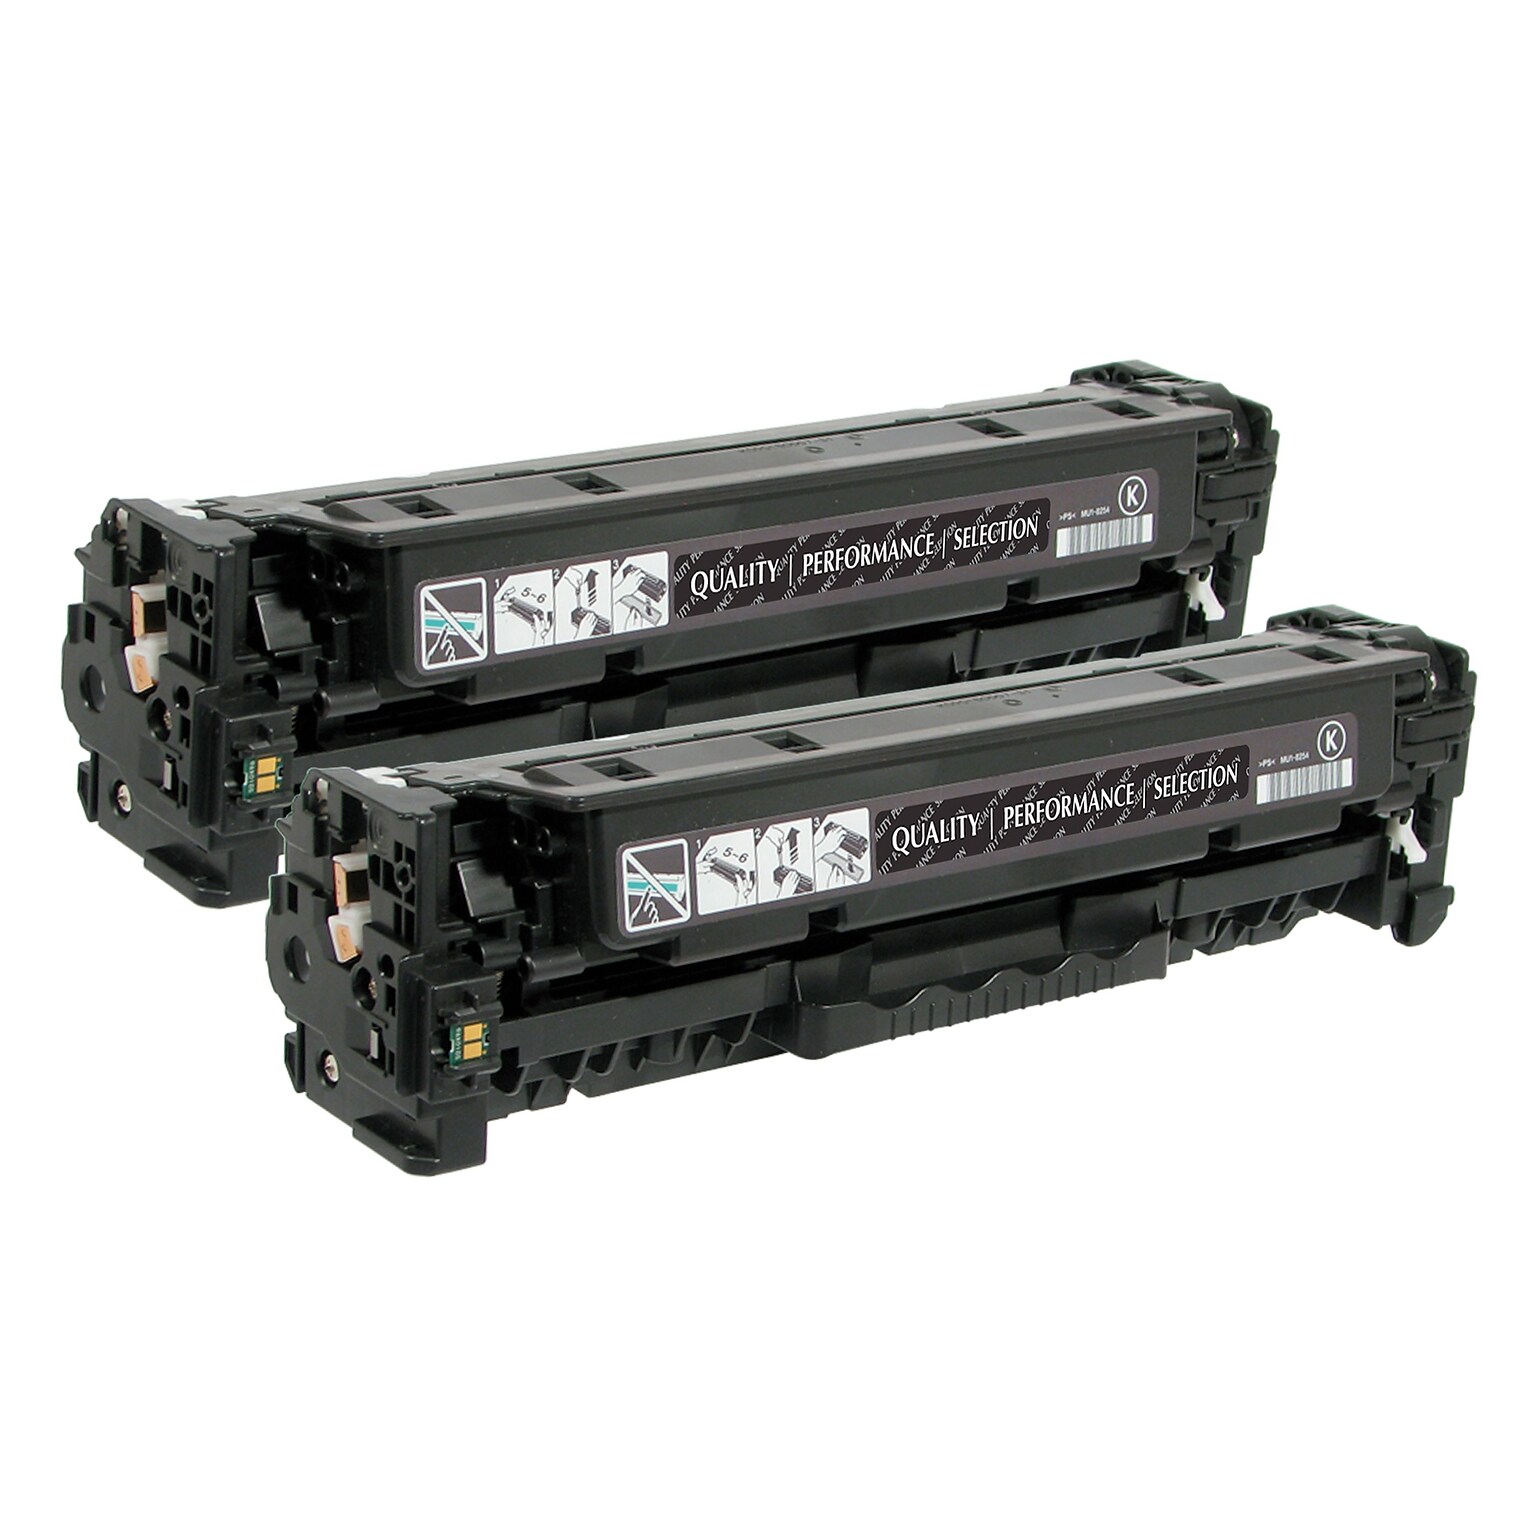 Quill Brand® Remanufactured Black High Yield Toner Cartridge Replacement for HP 305X (CE410XD), 2/Pack (Lifetime Warranty)